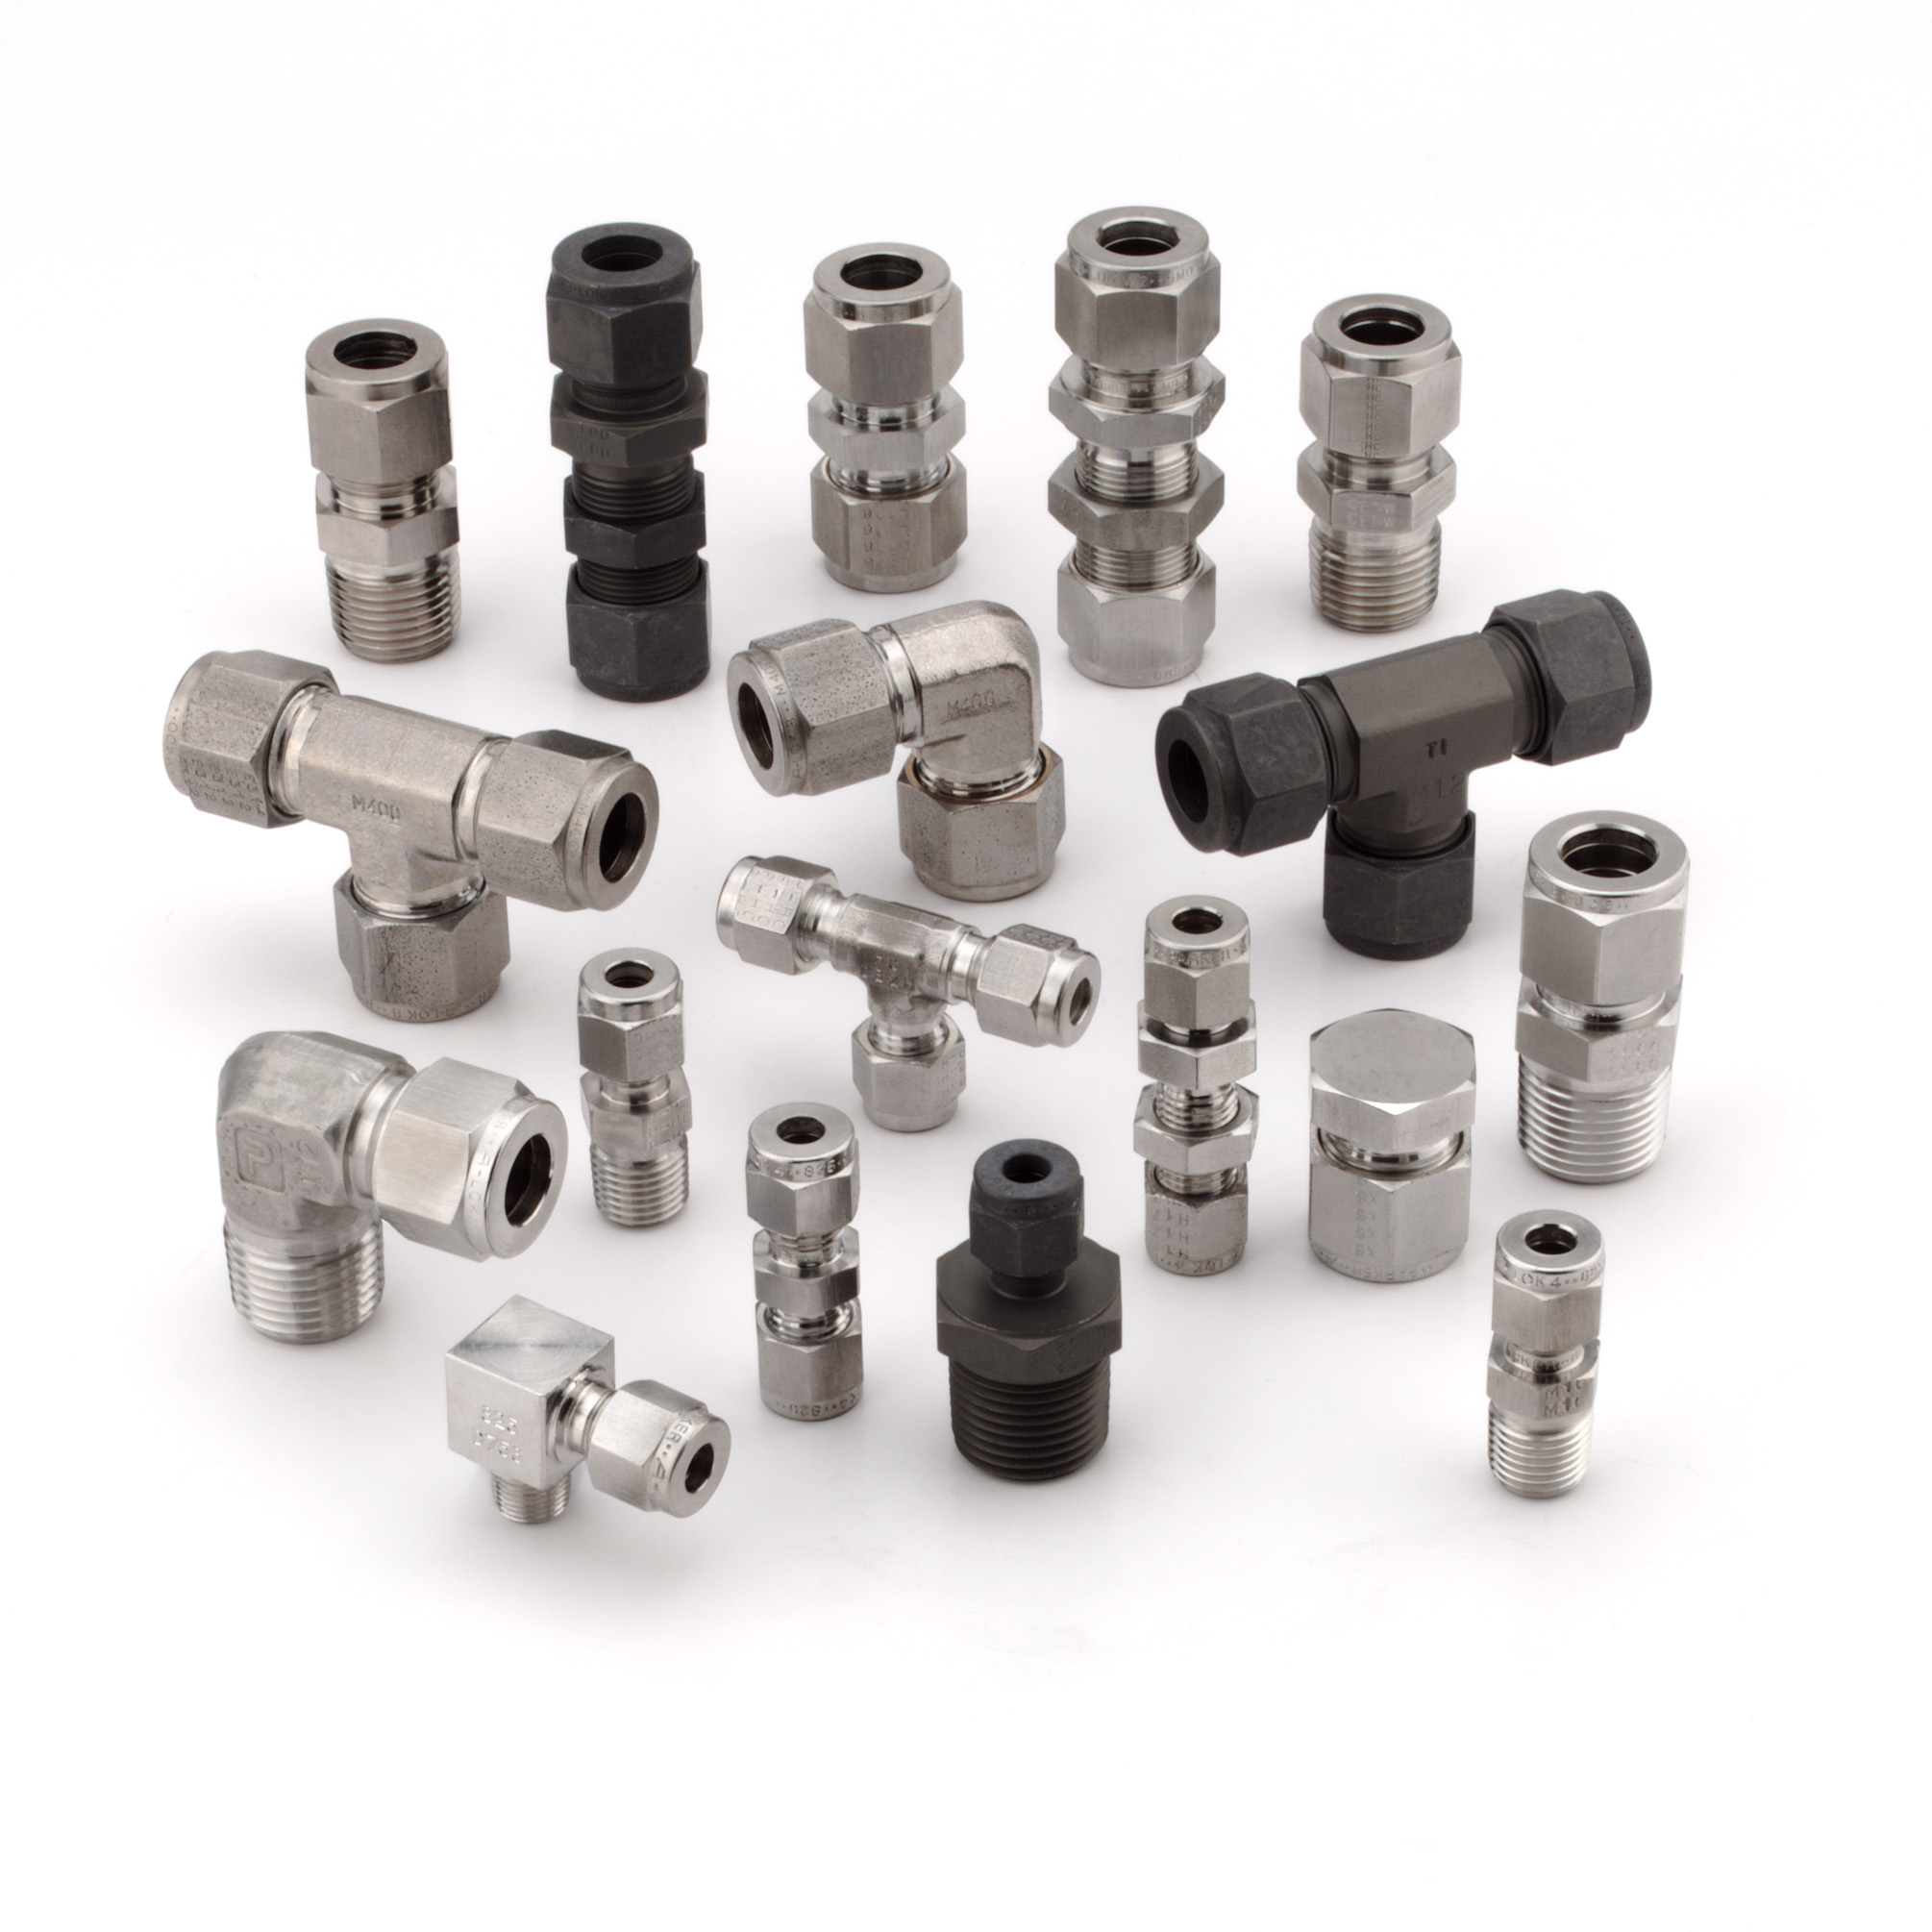 Parker A-LOK® Instrumentation Tube Fittings & Adapters in Stock